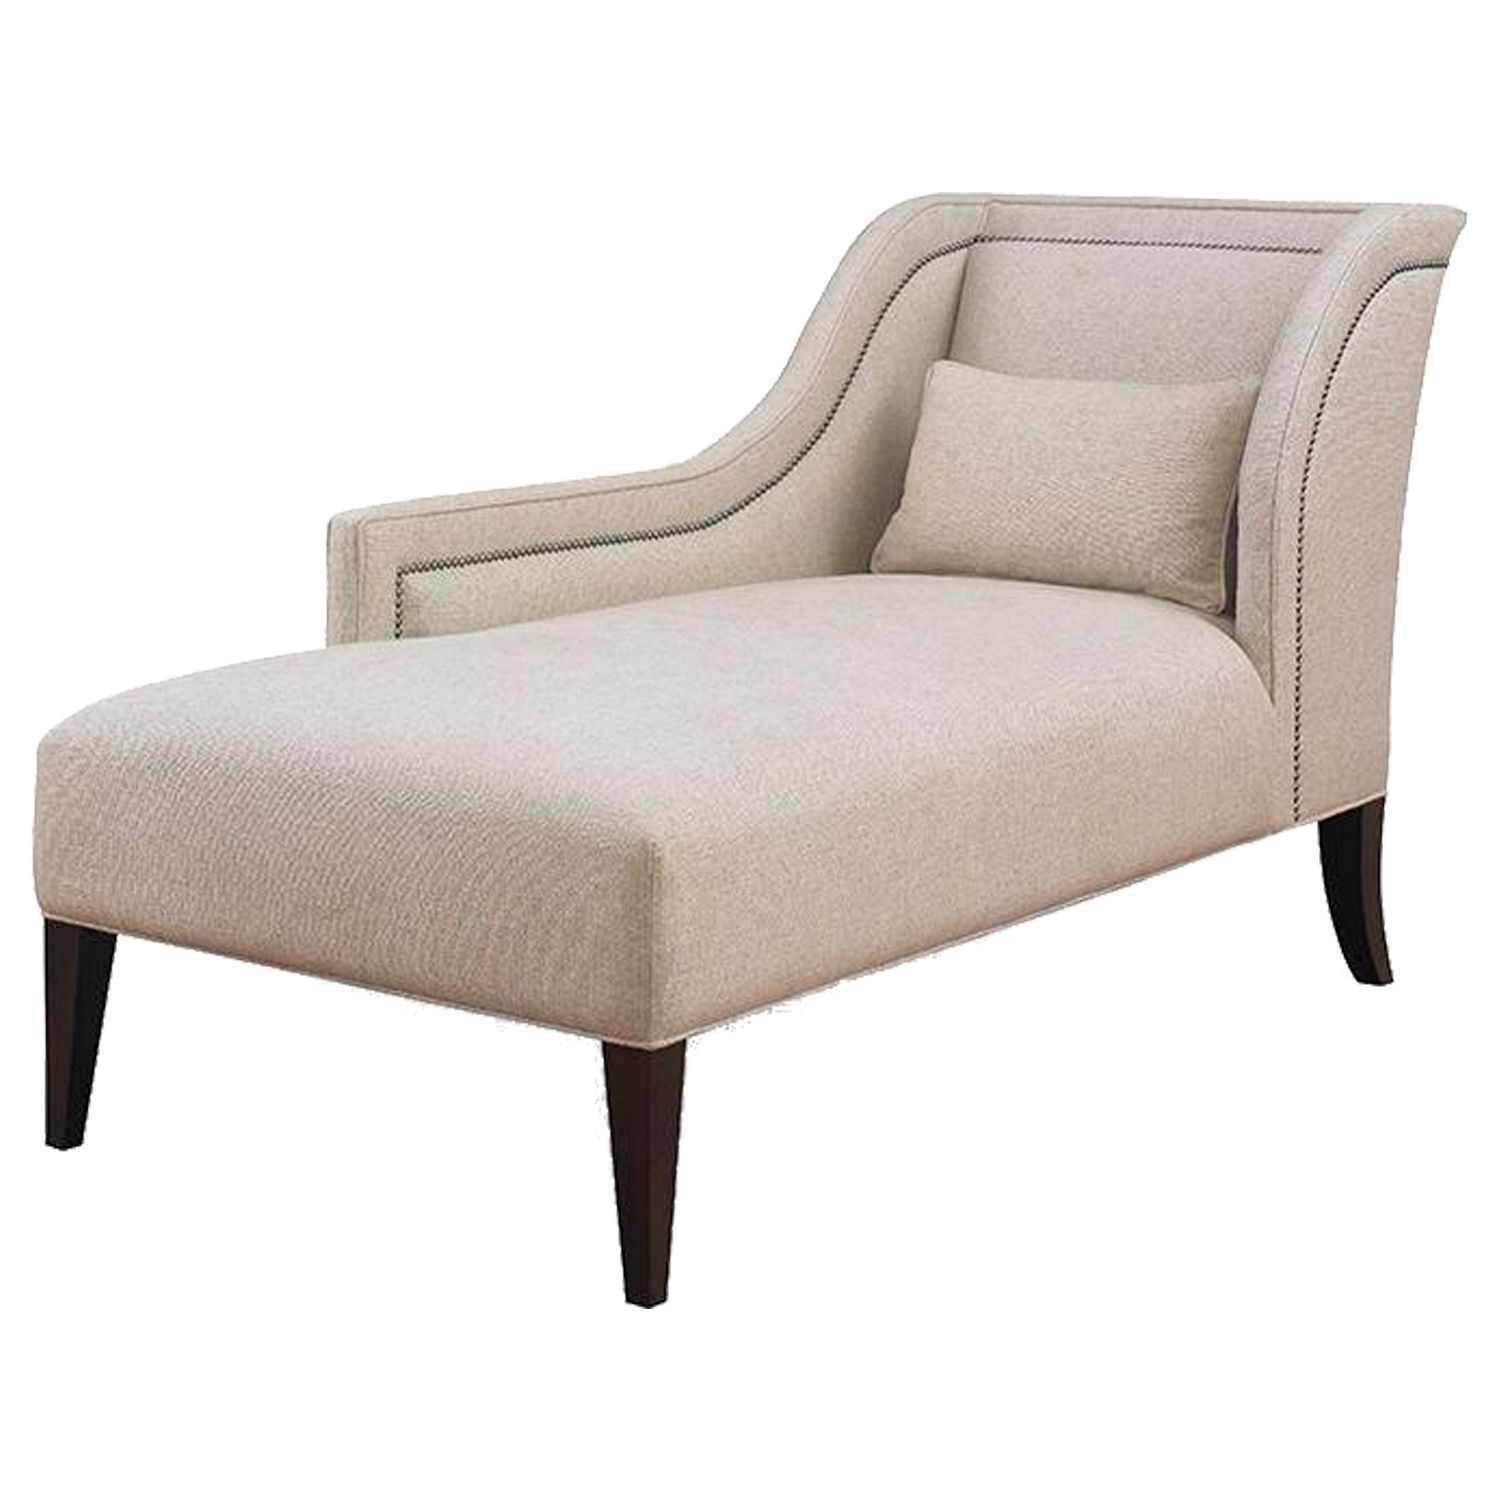 Modern Chaises With Regard To Well Known Buy Pasadena One Arm Chaisekravet – Made To Order Designer (View 12 of 15)